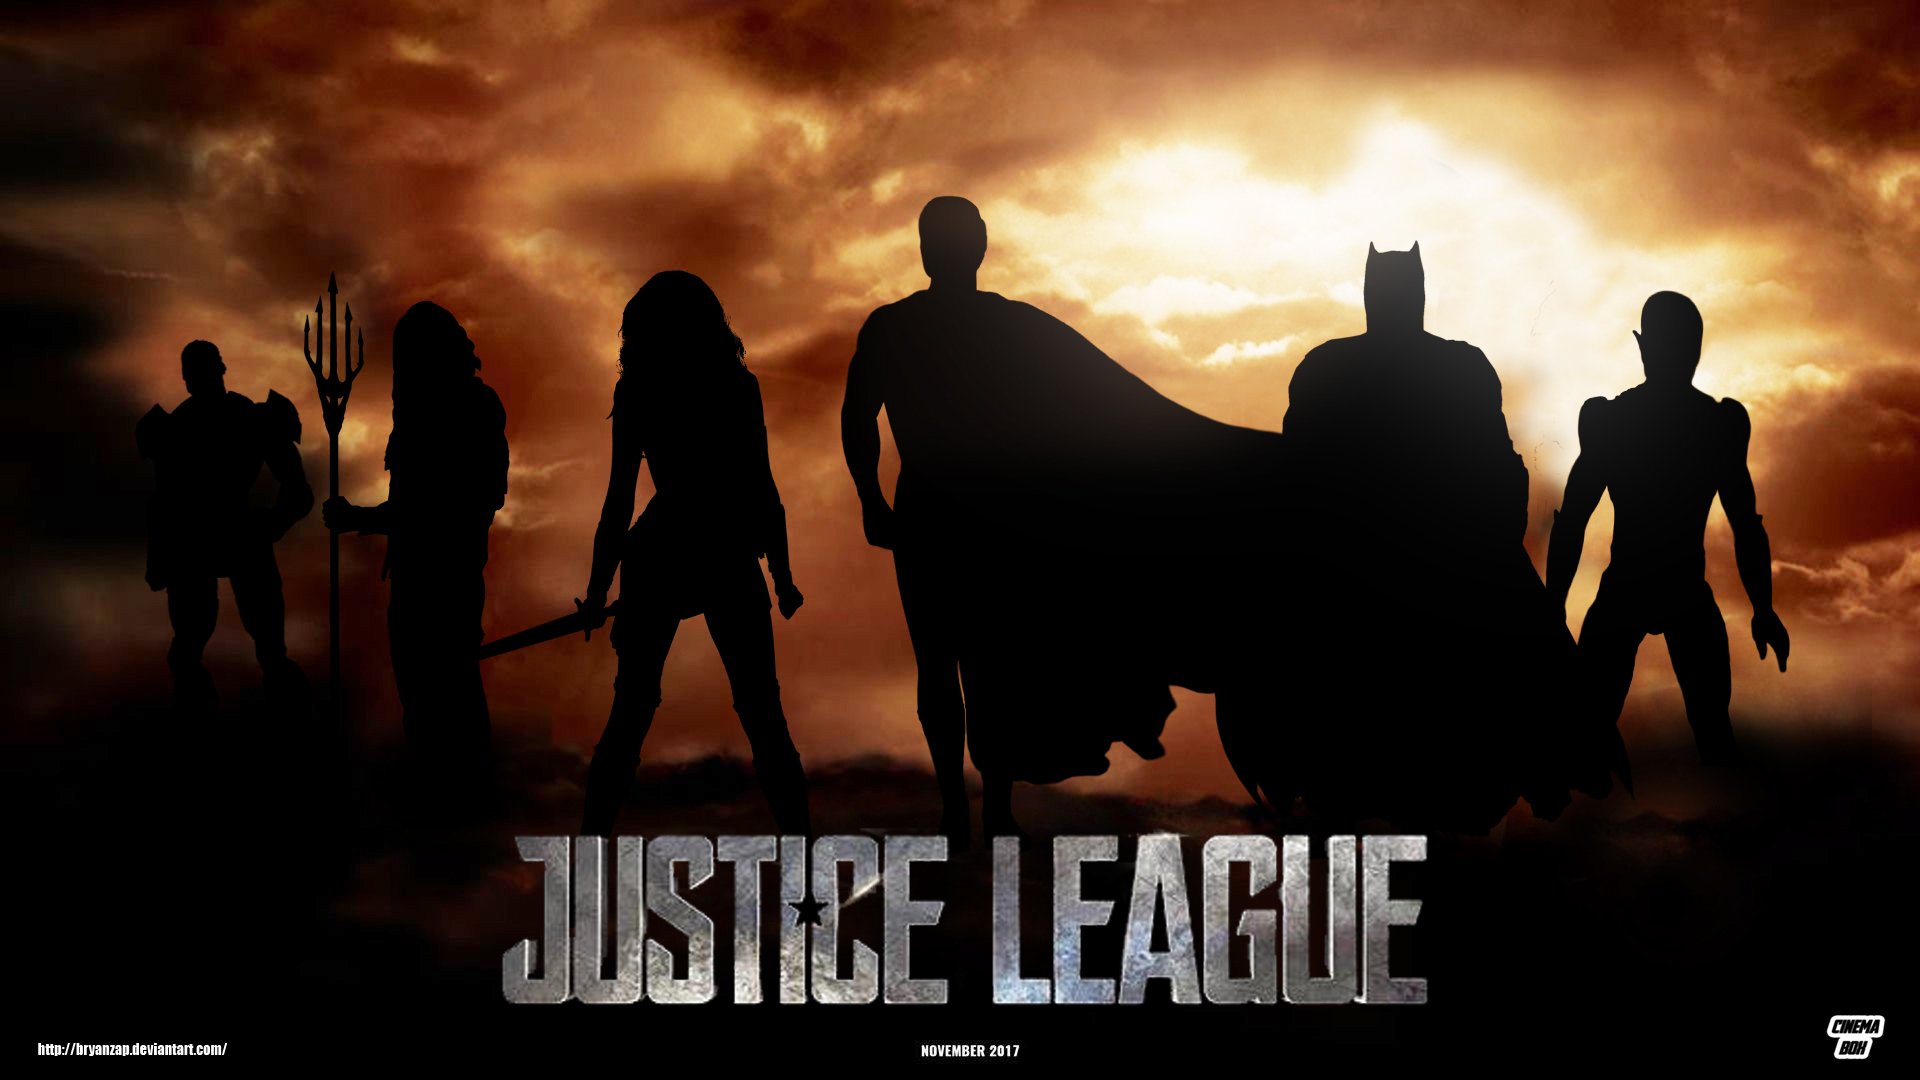 Justice League Background 2017 - HD Wallpaper 